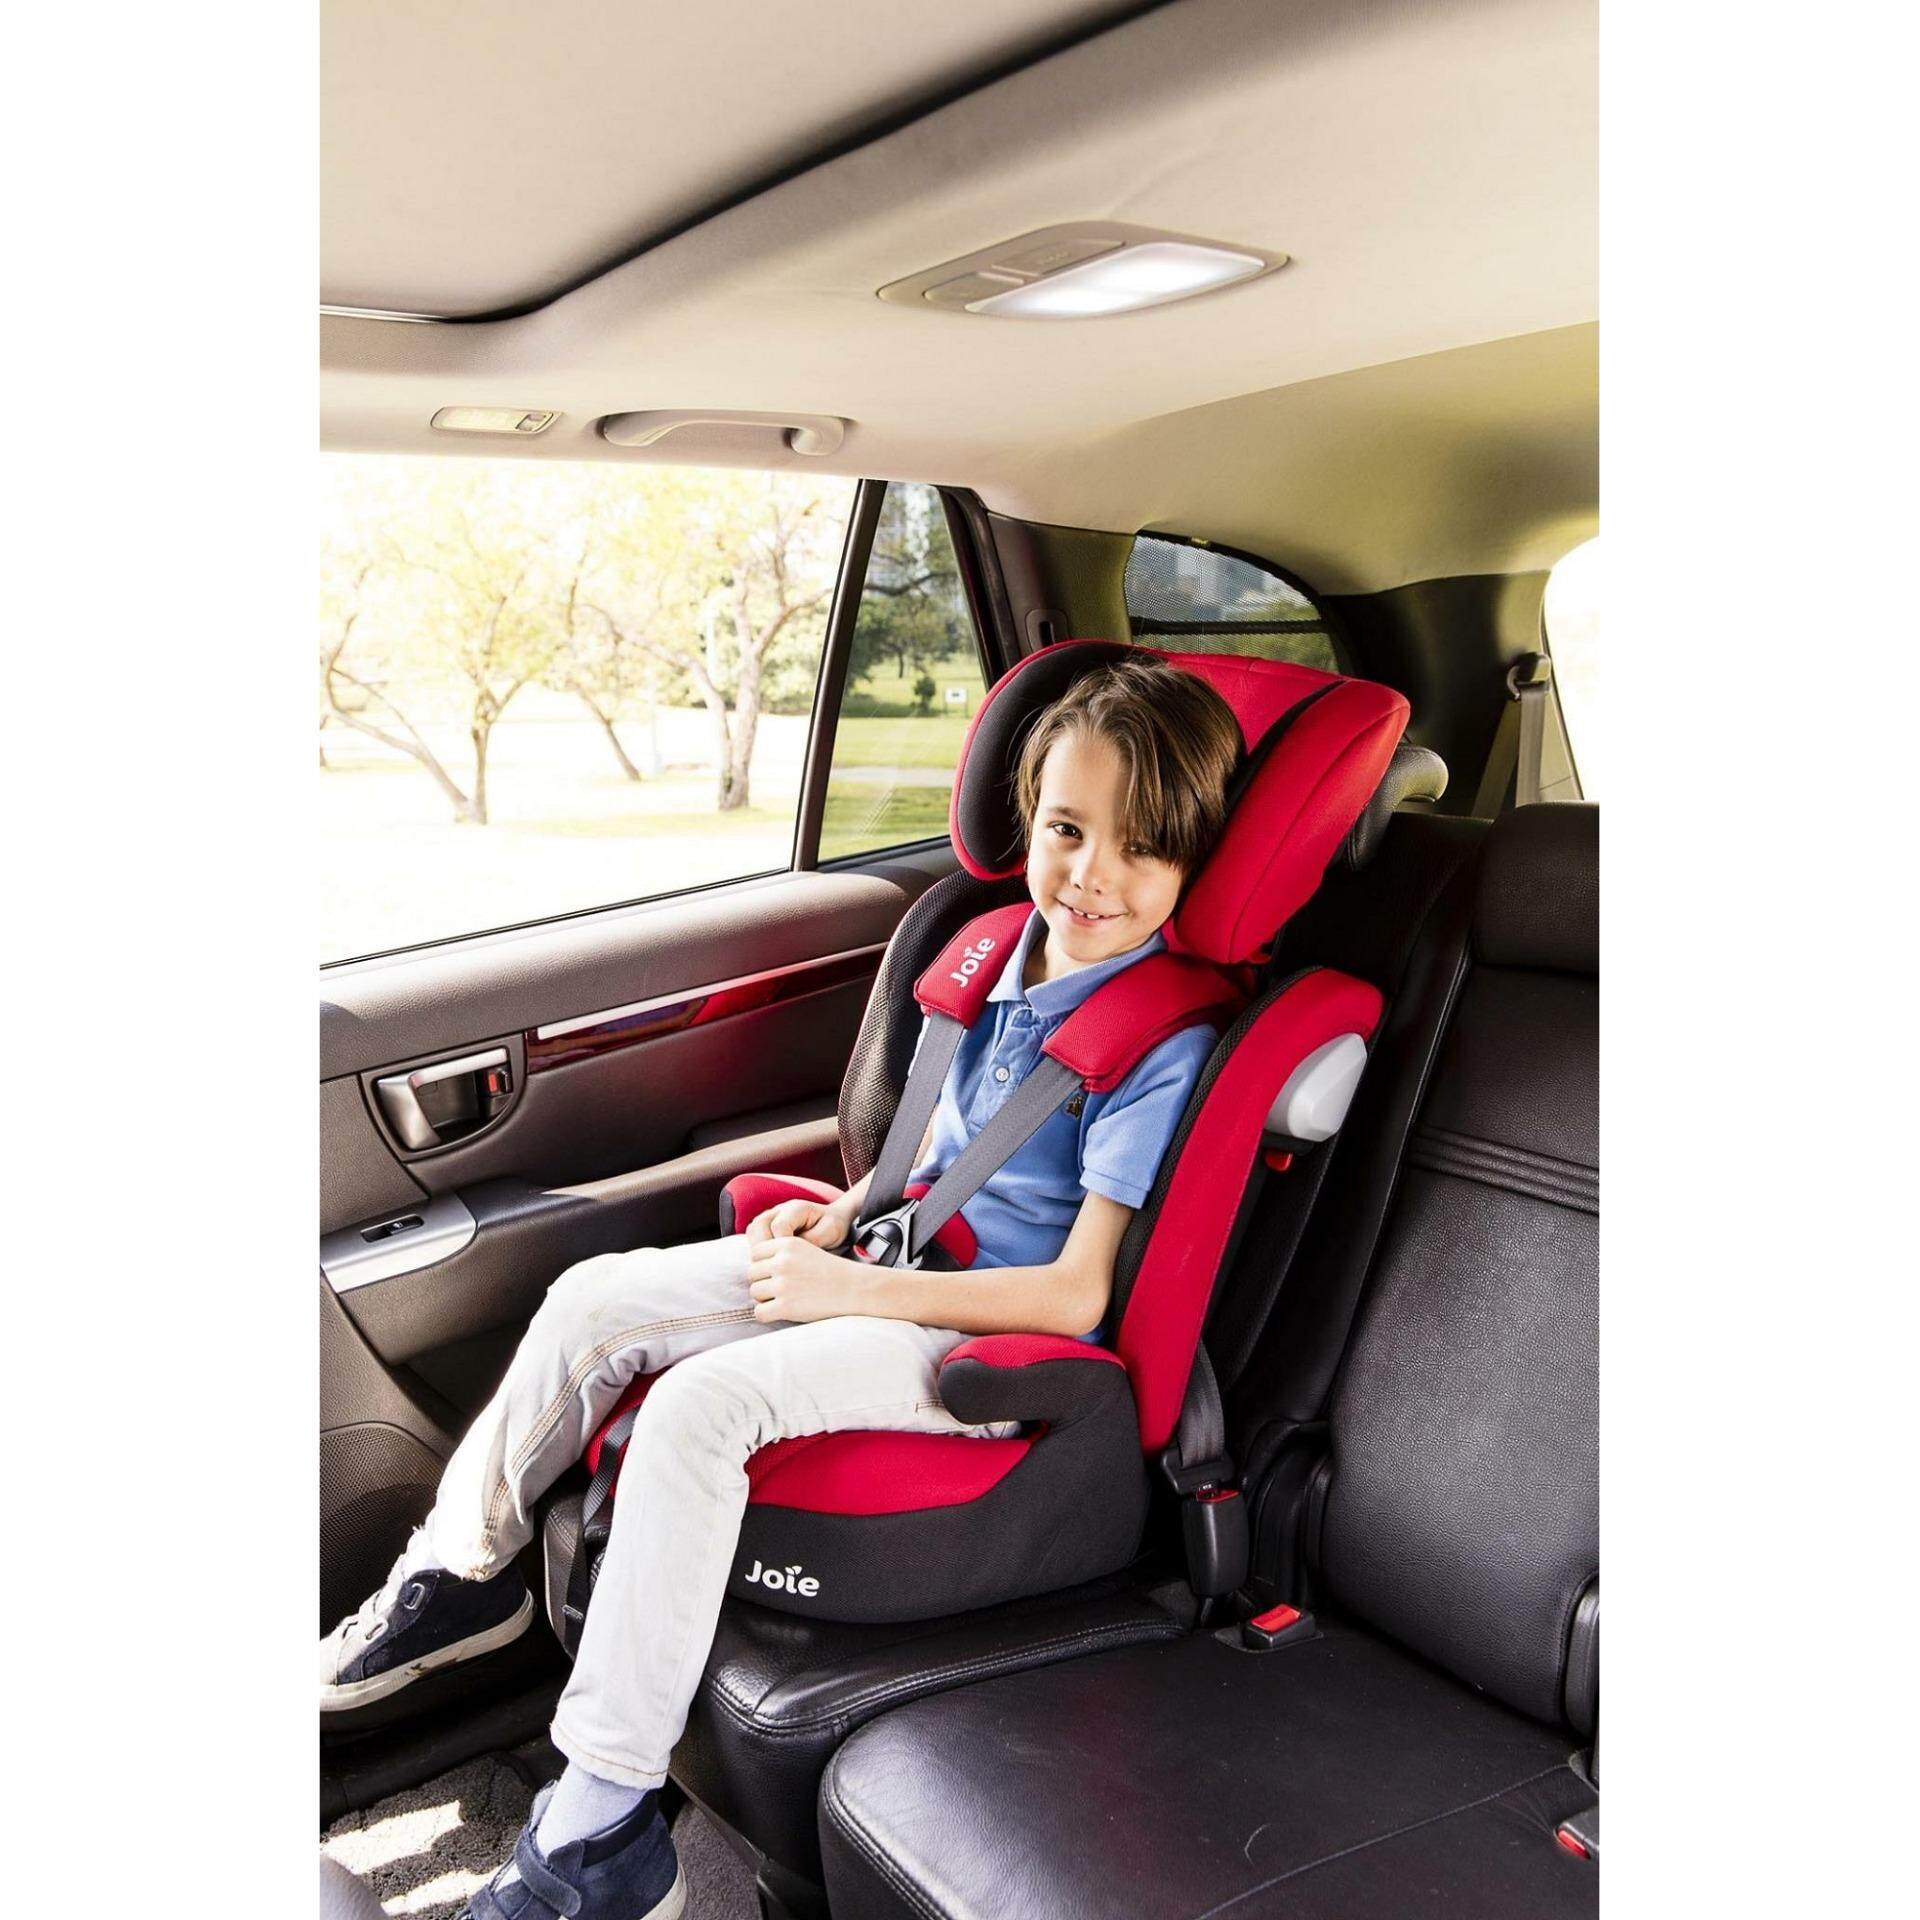 Joie (UK) Elevate Car Seat, Cherry (Suitable for babies approx 1-12 years old)